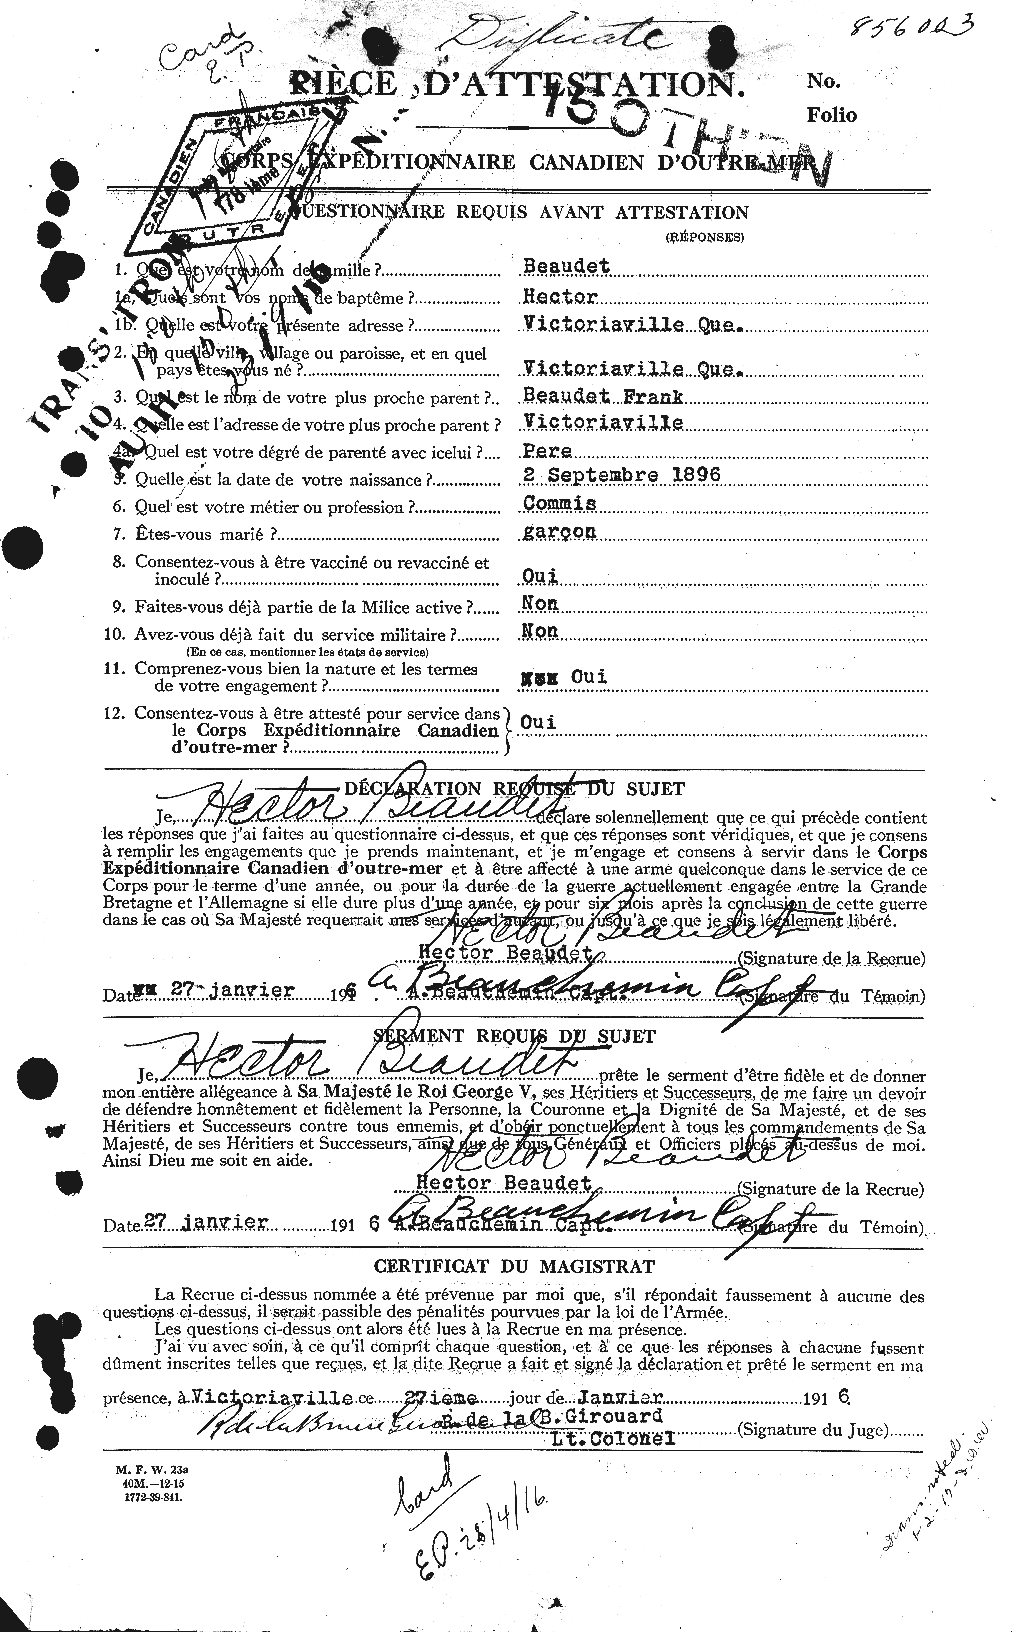 Personnel Records of the First World War - CEF 231112a